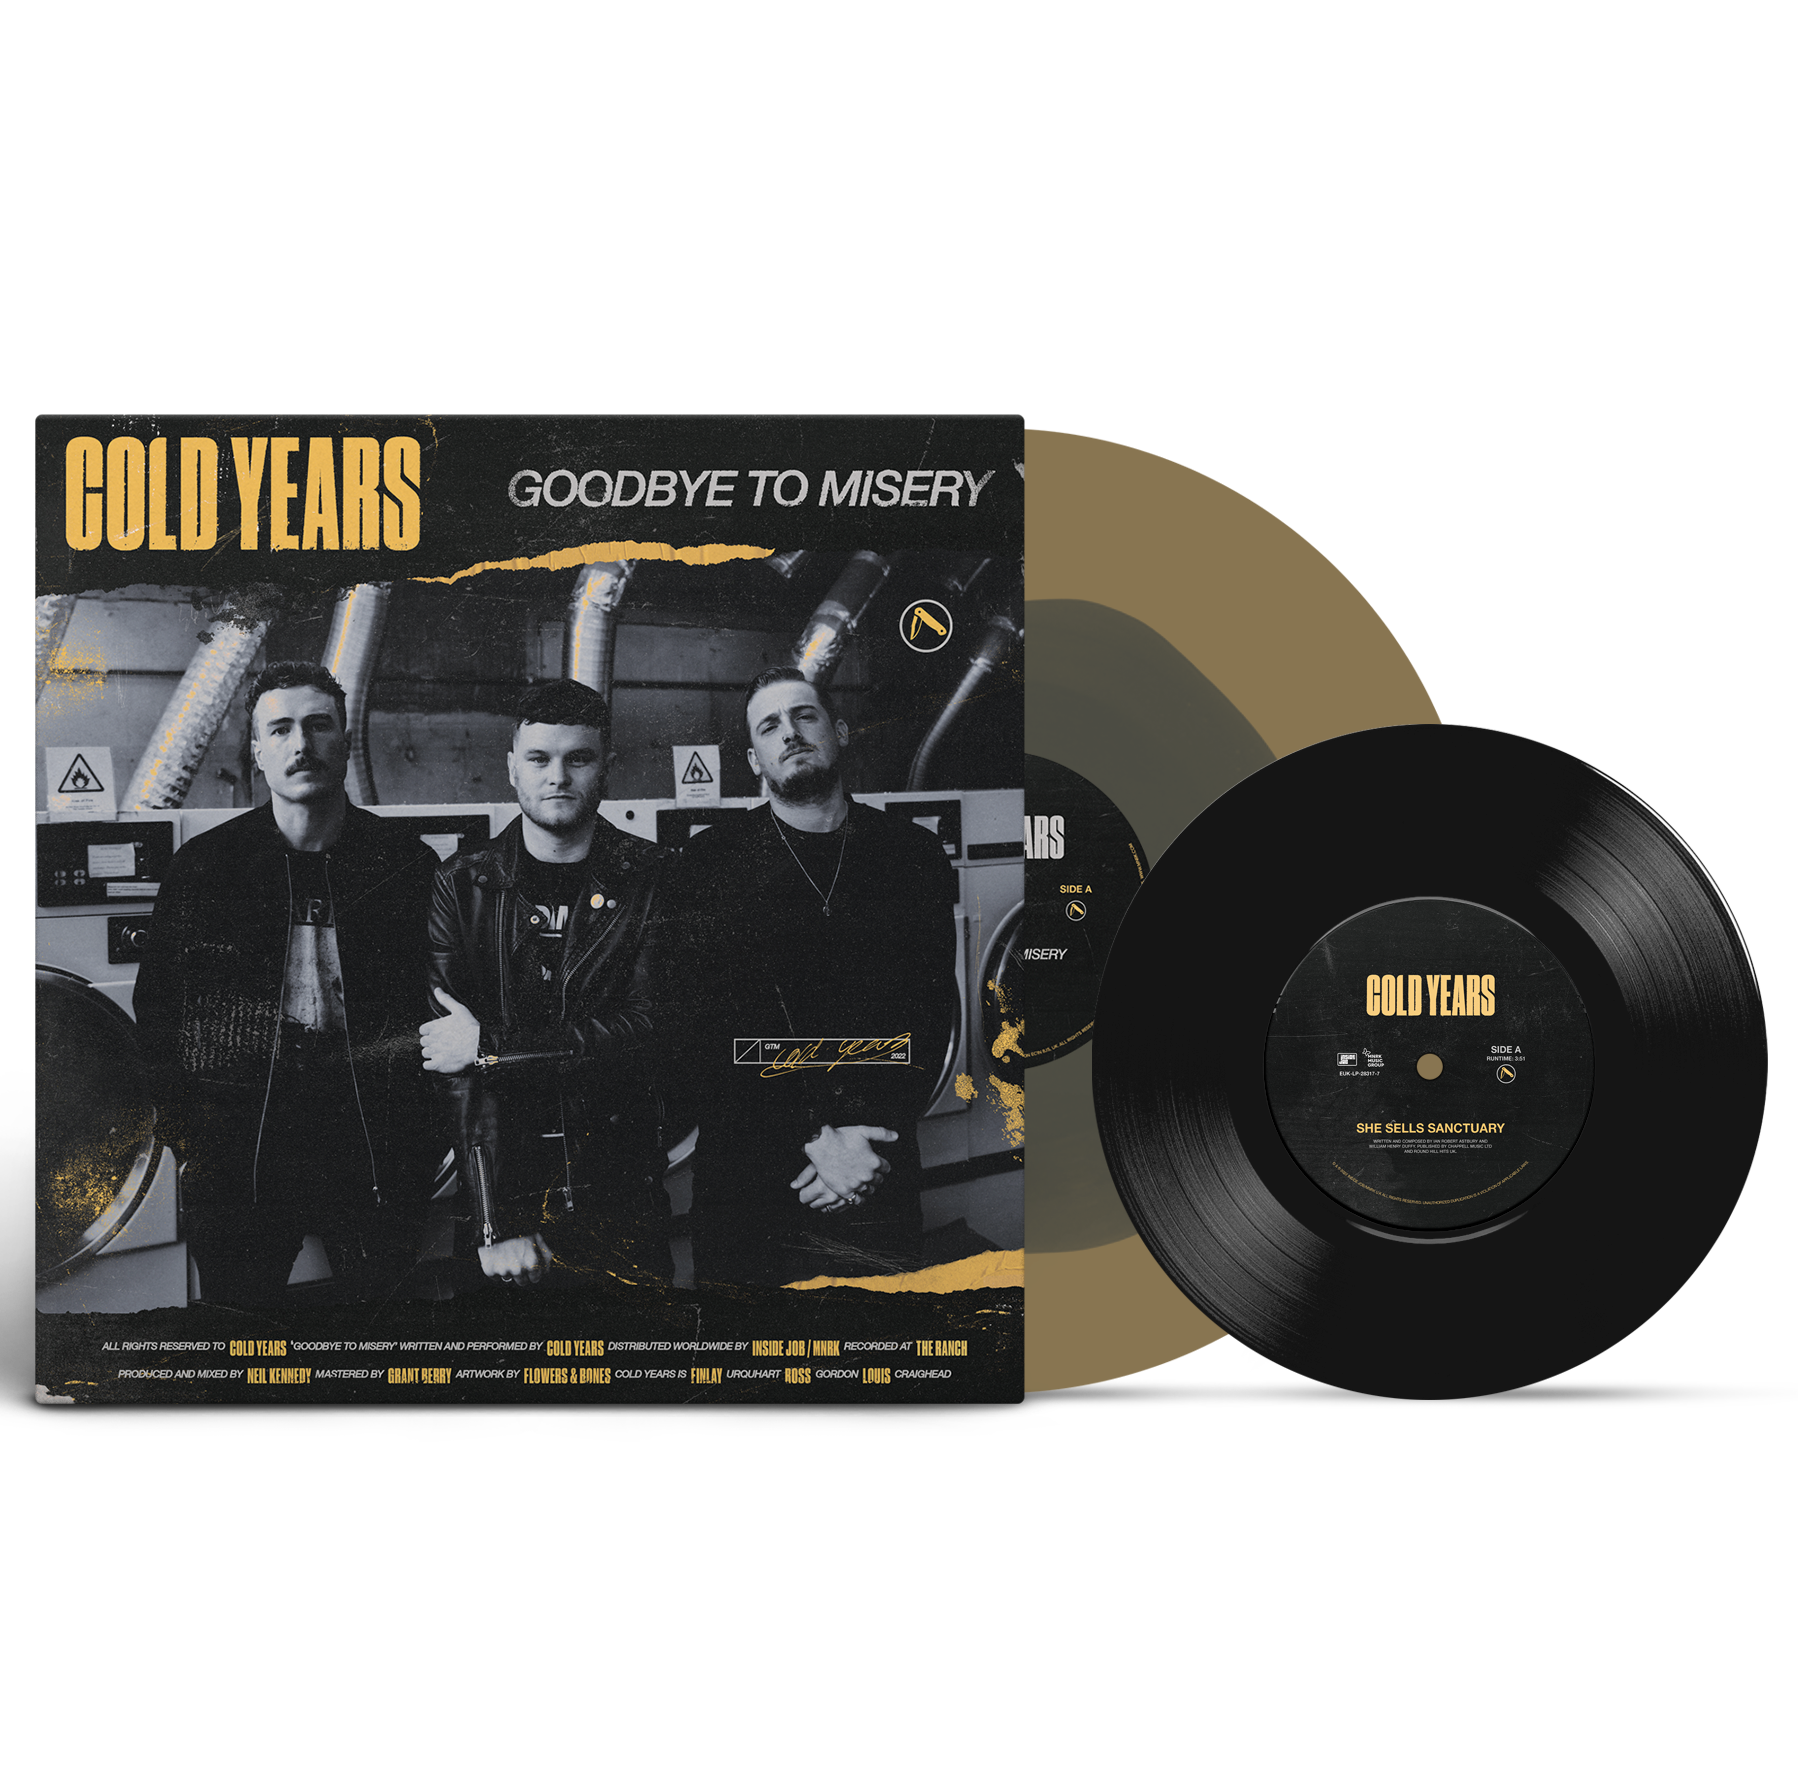 Cold Years - Goodbye To Misery color in color (black/gold) vinyl LP + 7-inch